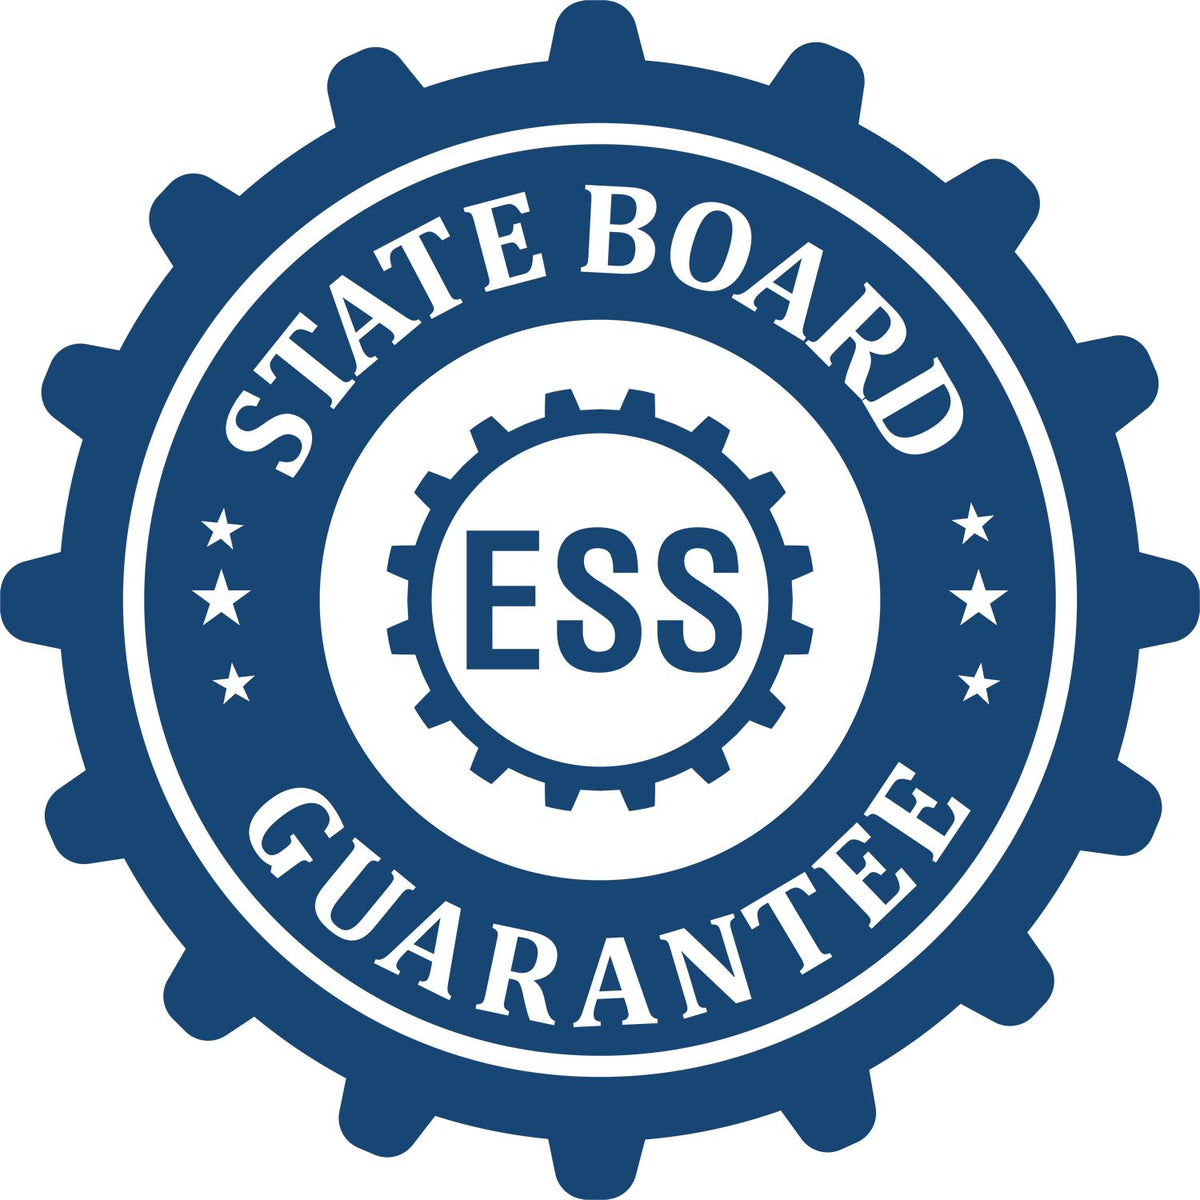 An emblem in a gear shape illustrating a state board guarantee for the Premium MaxLight Pre-Inked North Carolina Landscape Architectural Stamp product.